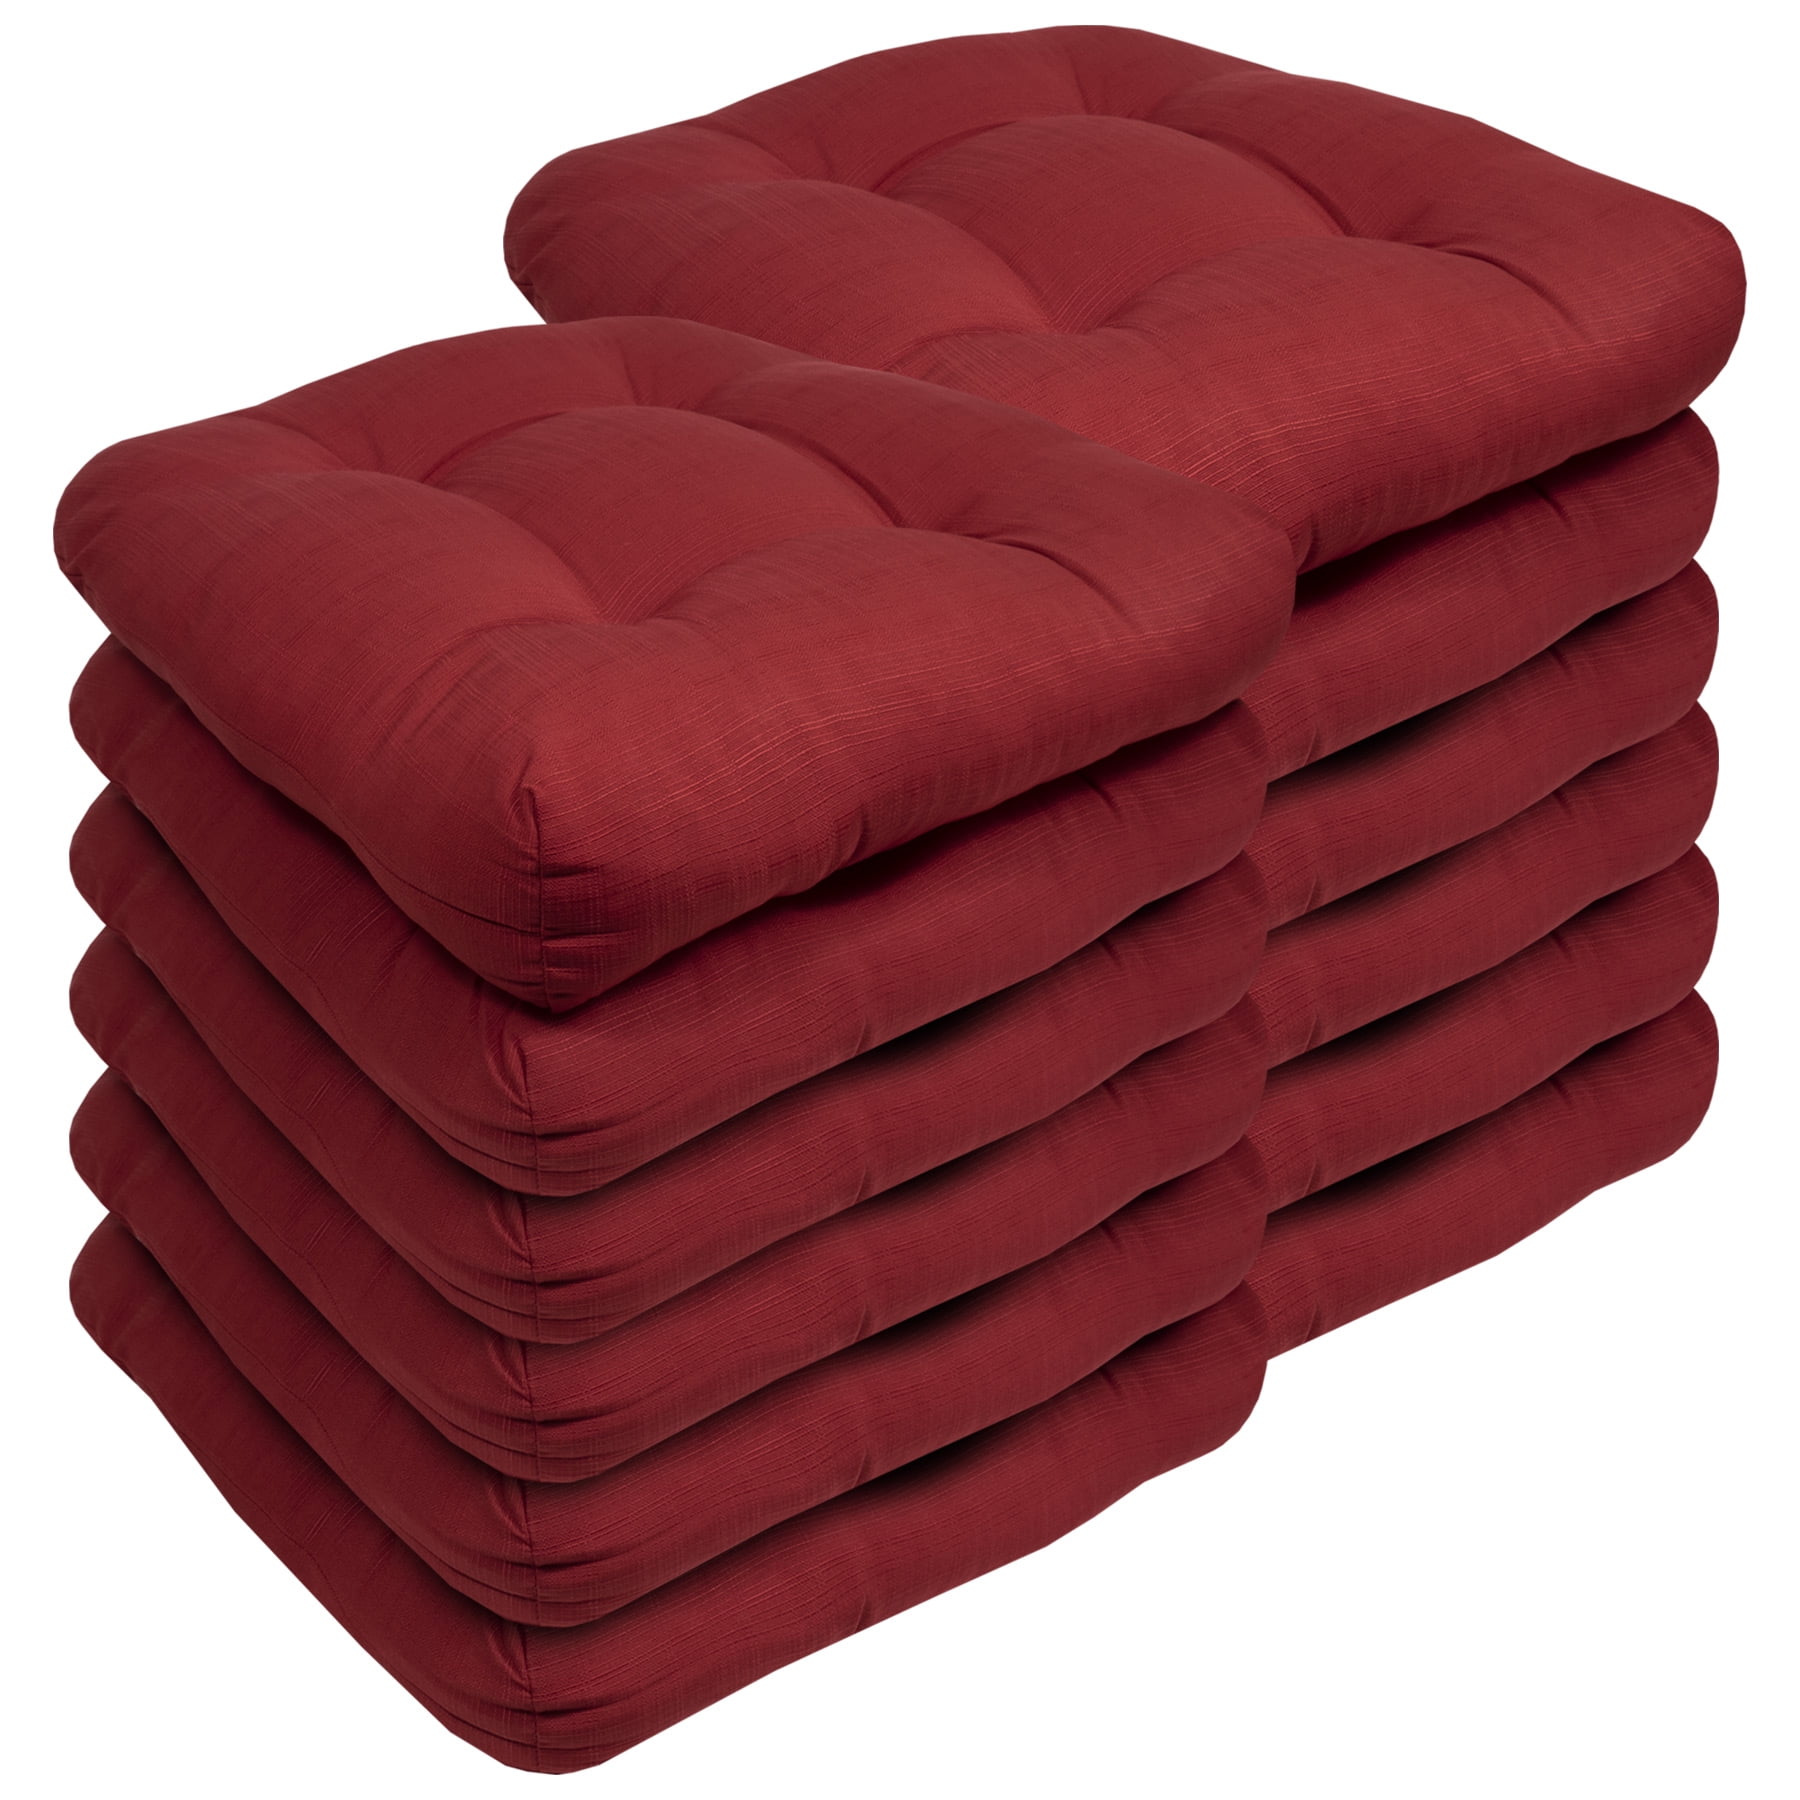 Details about   4pcs Cushion Seats Chair Pad Cushions Mat Patio Cushion Pad for Cafe  MultiColor 